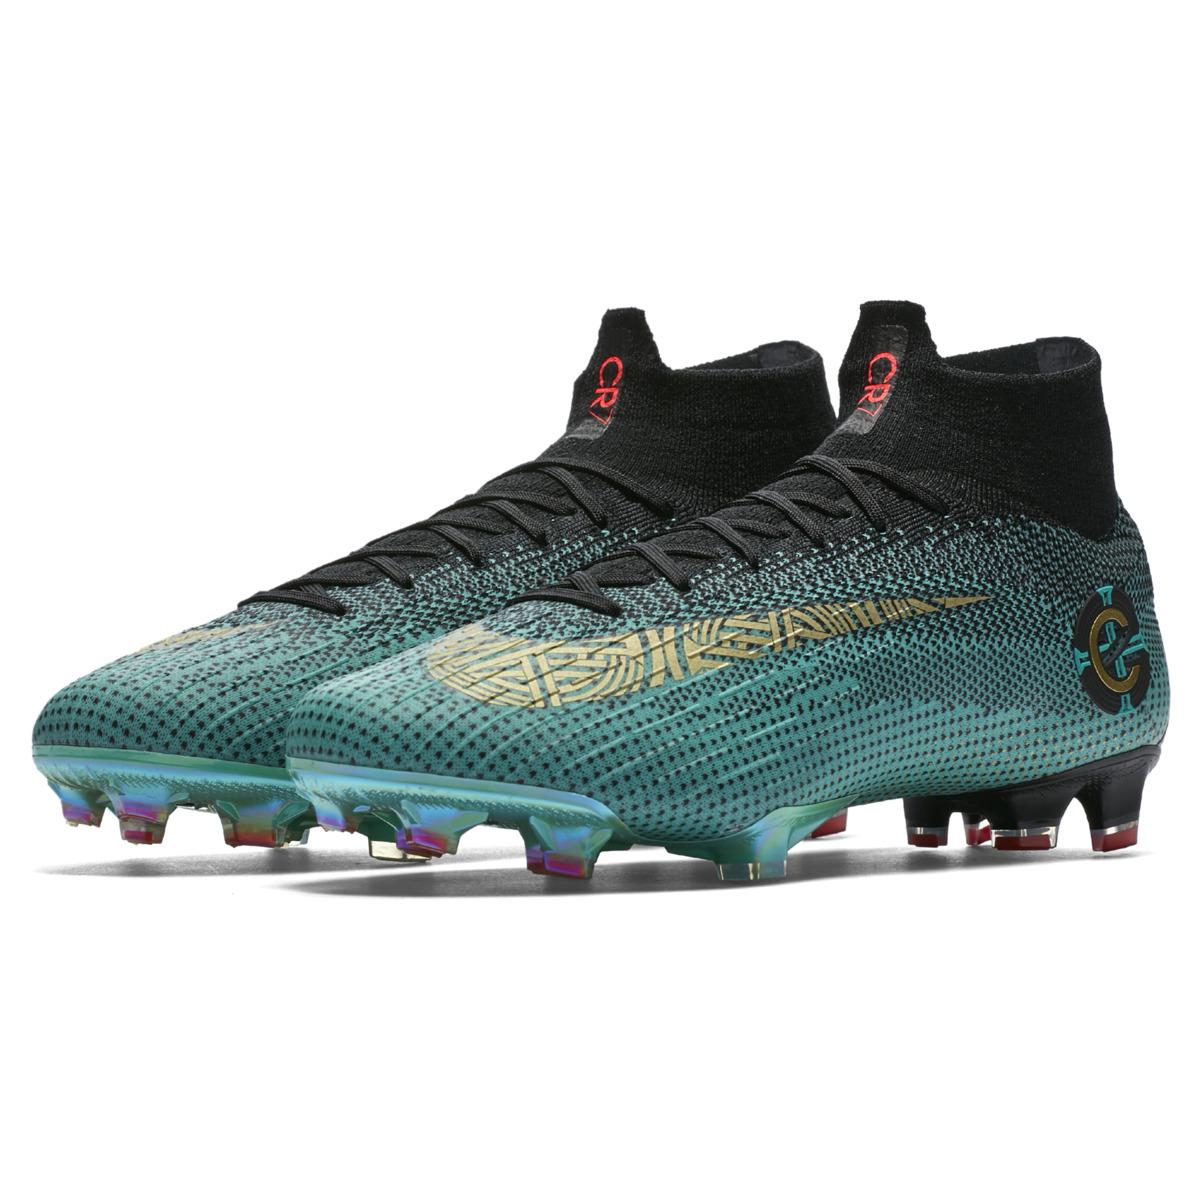 Nike Mercurial Superfly 360 Elite Cr7 (fg) Football Boots in Green for ...